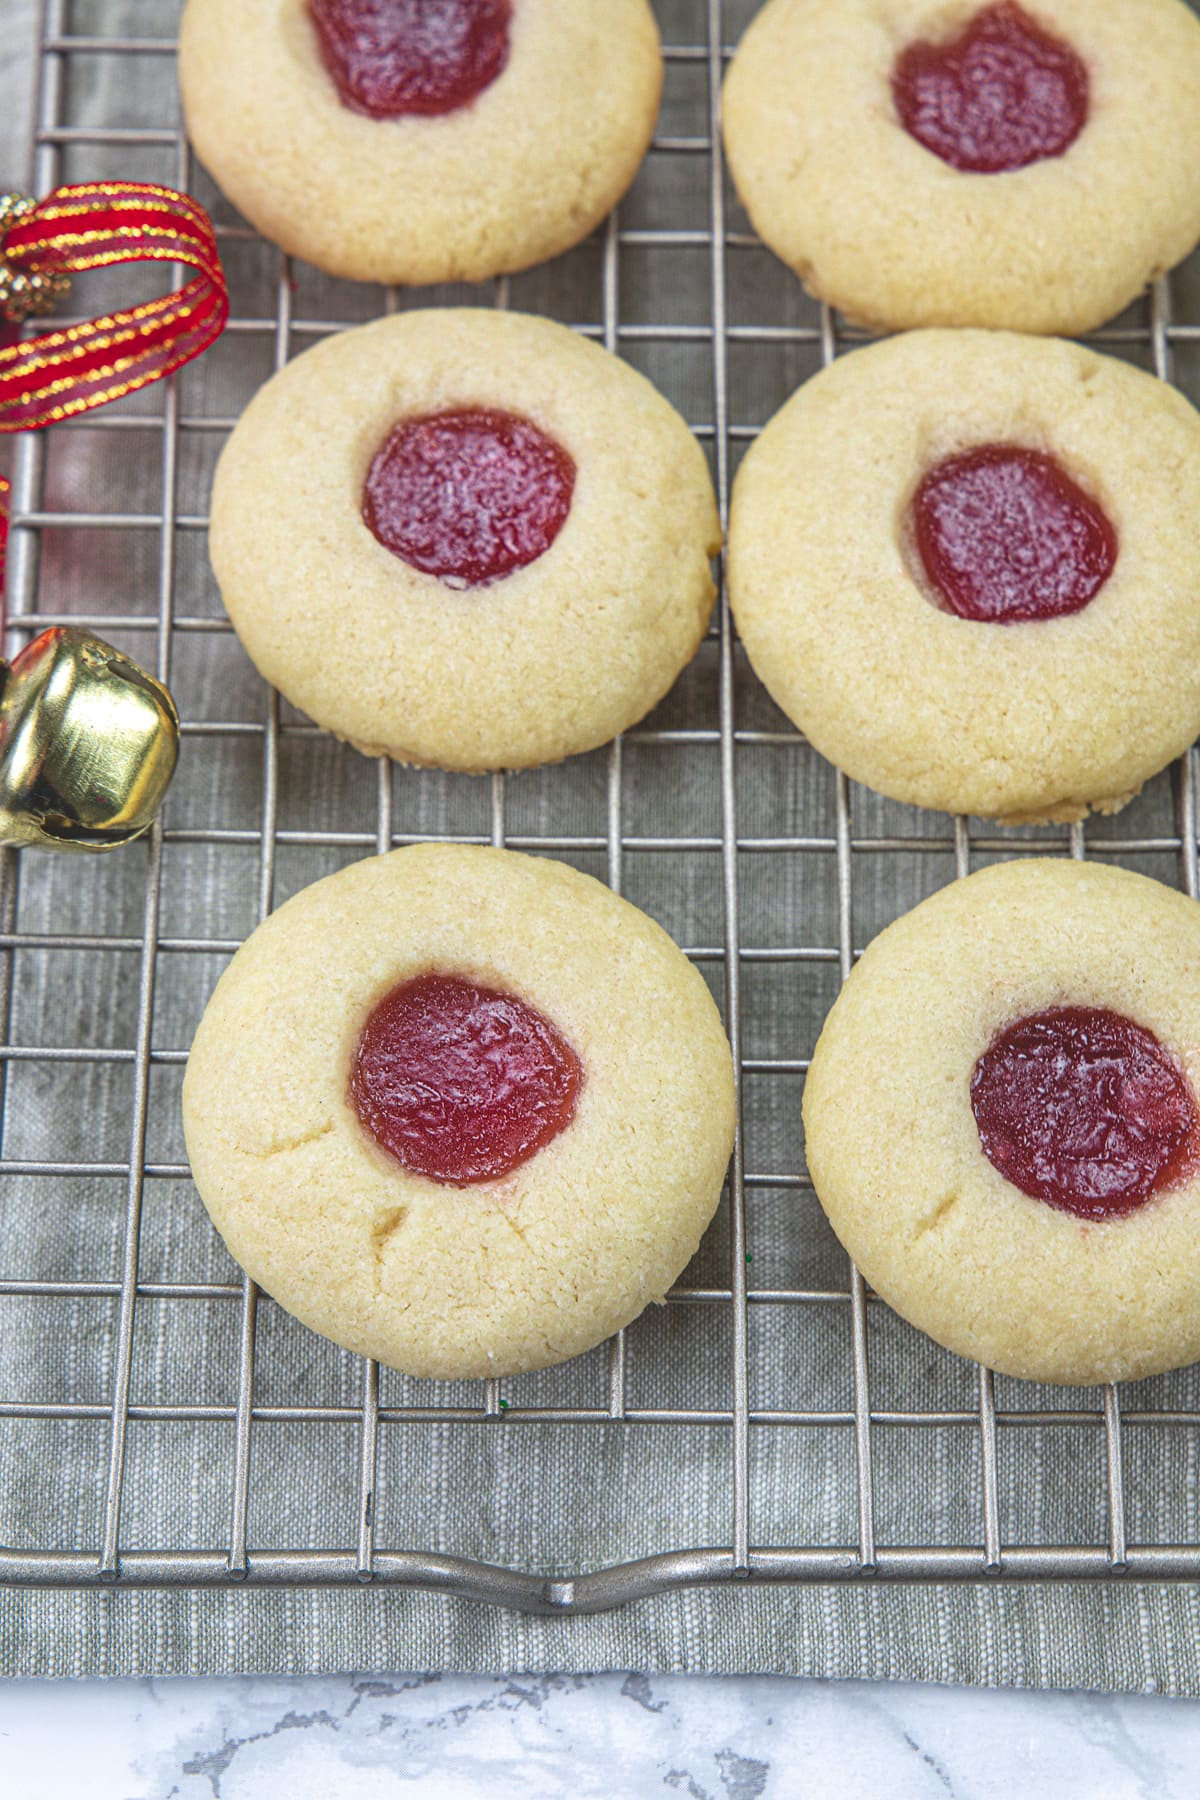 Eggless thumbprint cookies on a cooling rack with napkin under the rack.